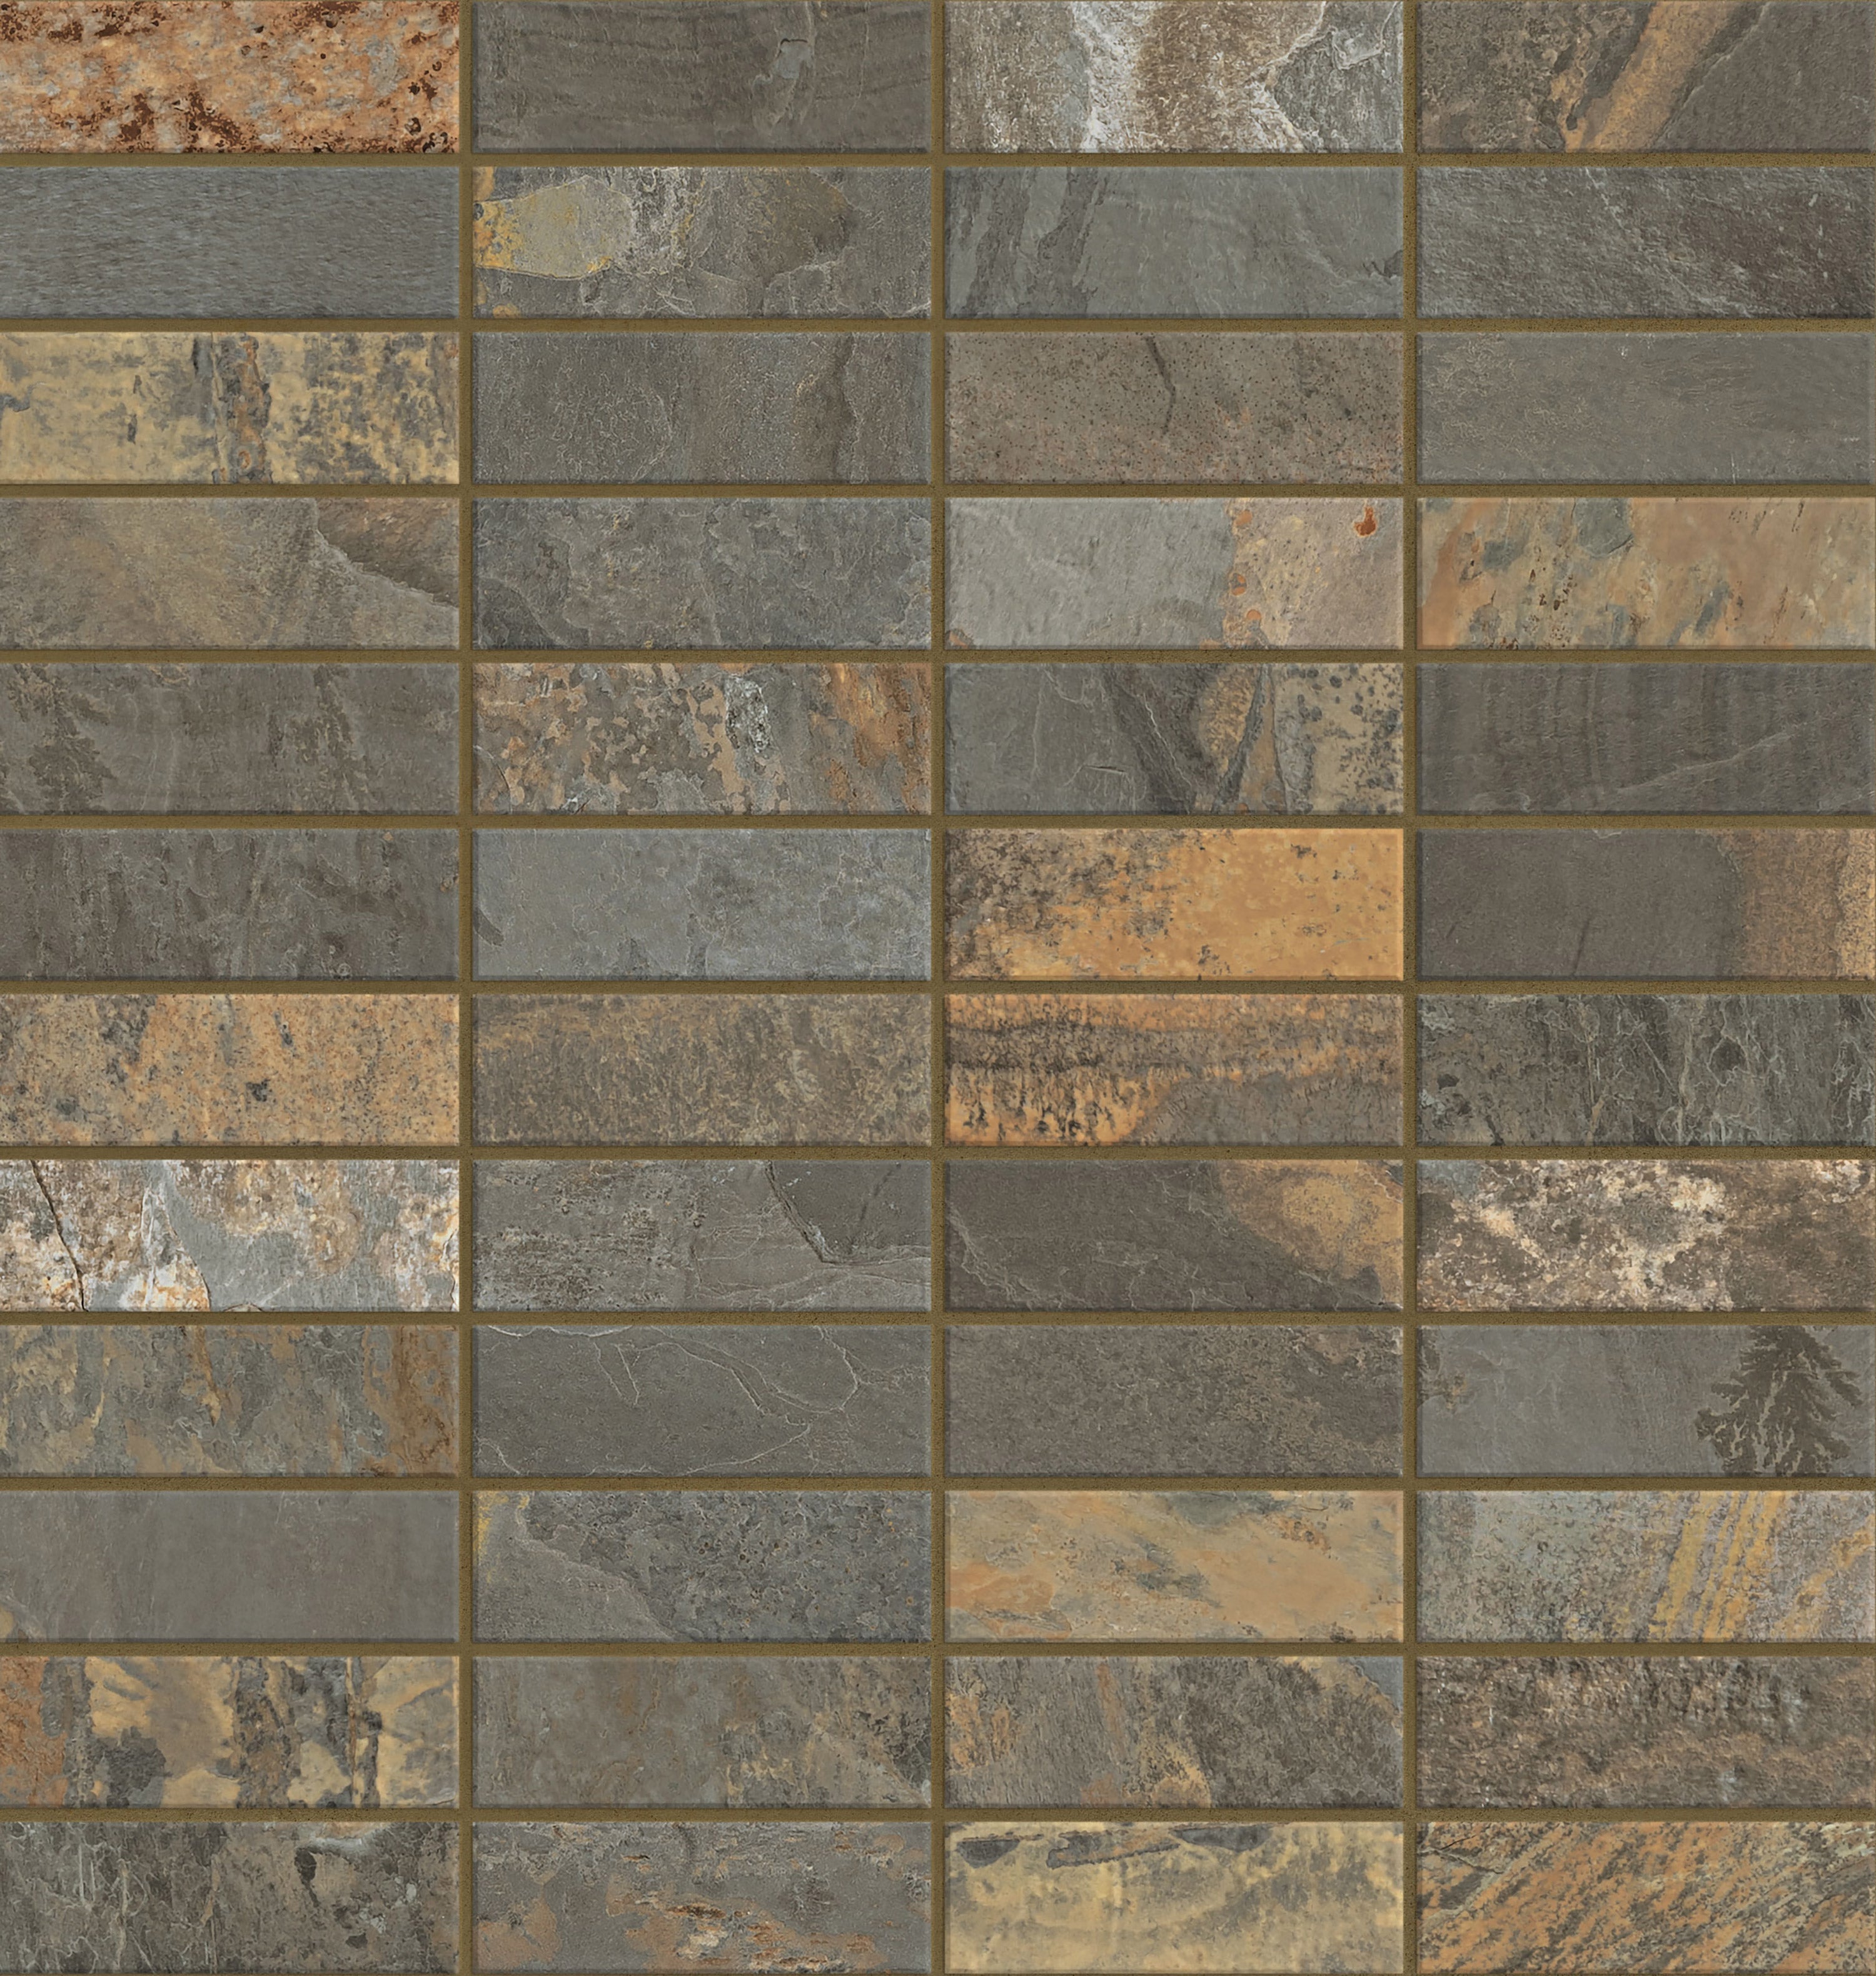 landmark 9mm essence california gold straight stack 1x3 mosaic 12x12x9mm matte rectified porcelain tile distributed by surface group international